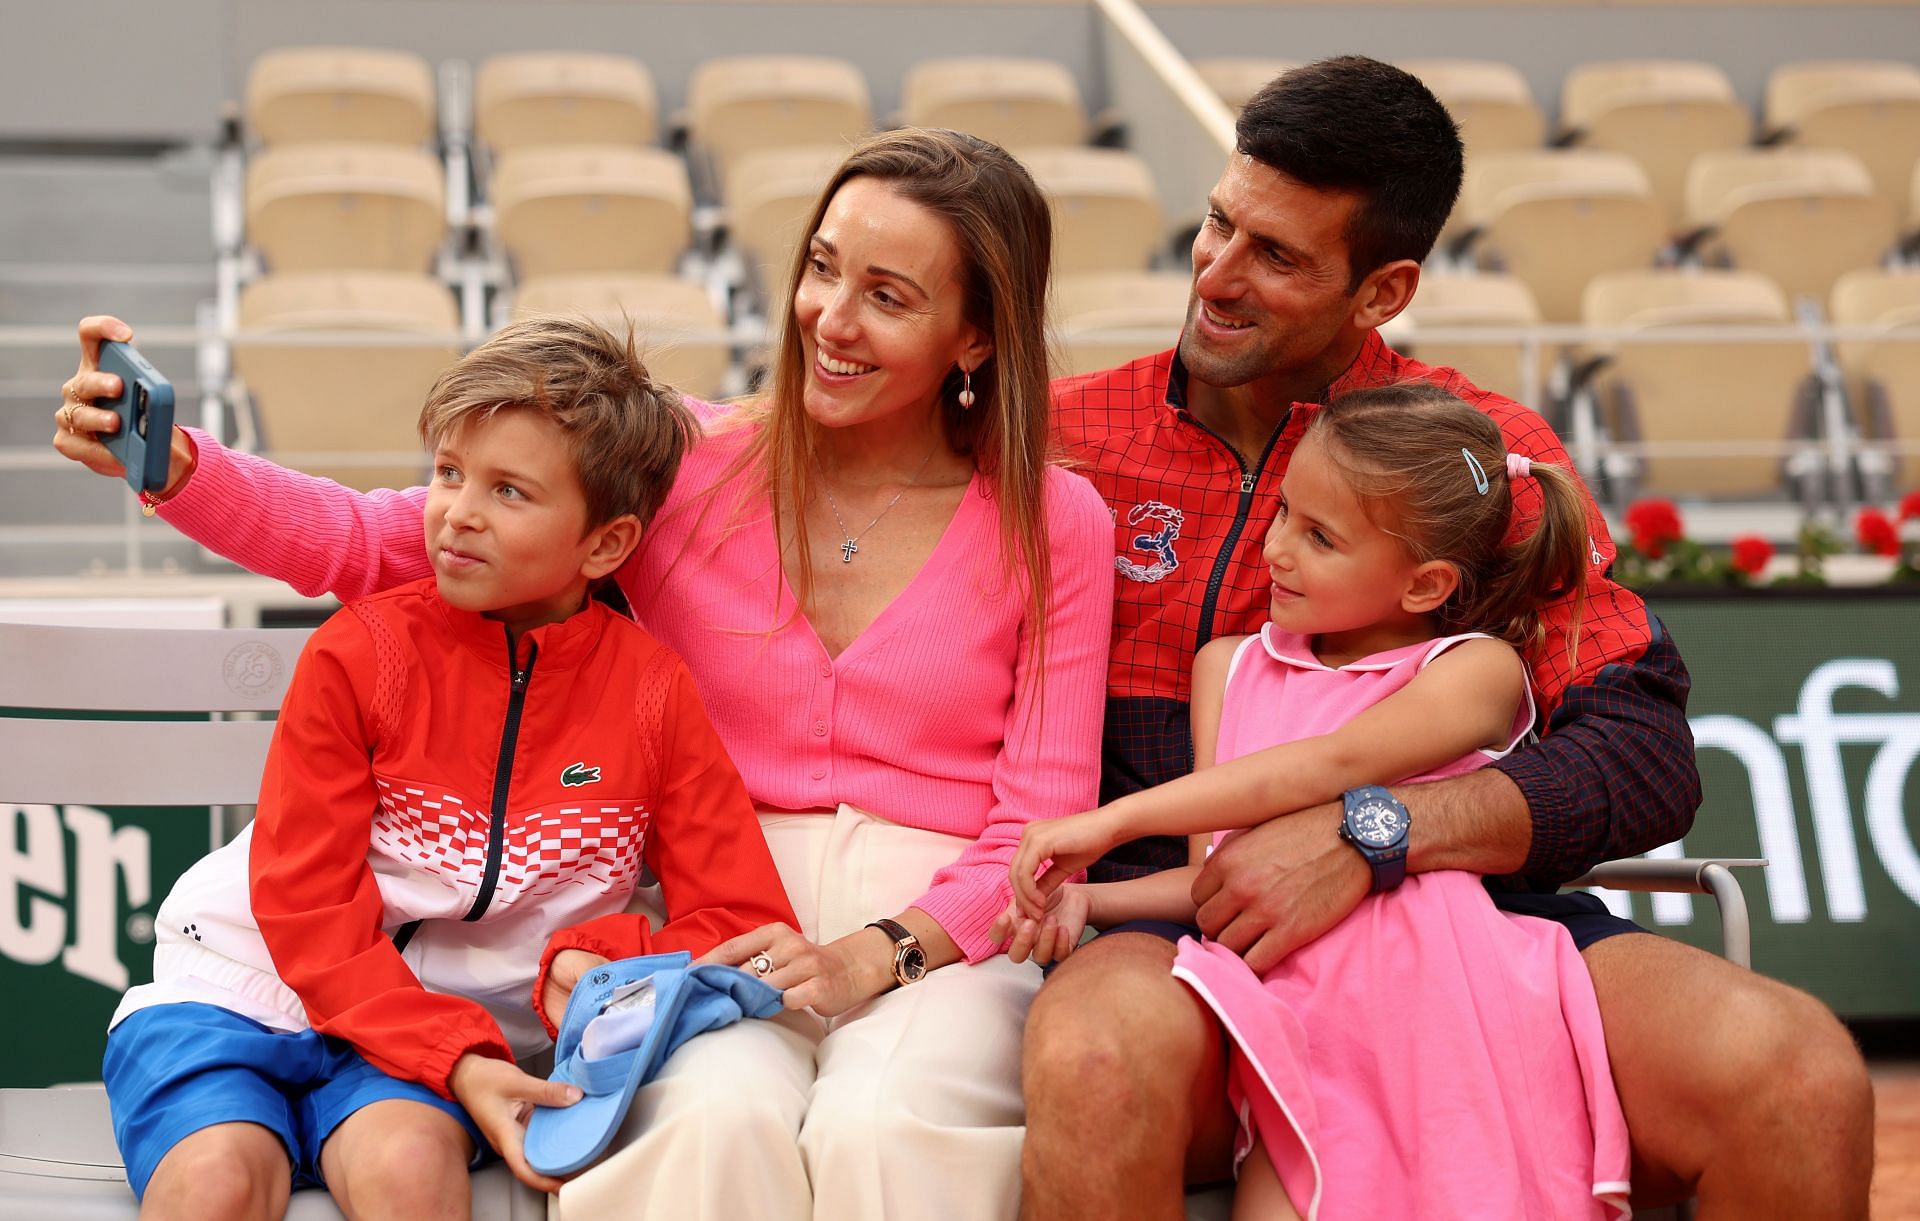 The World No. 1 with his wife and kids at the 2023 French Open